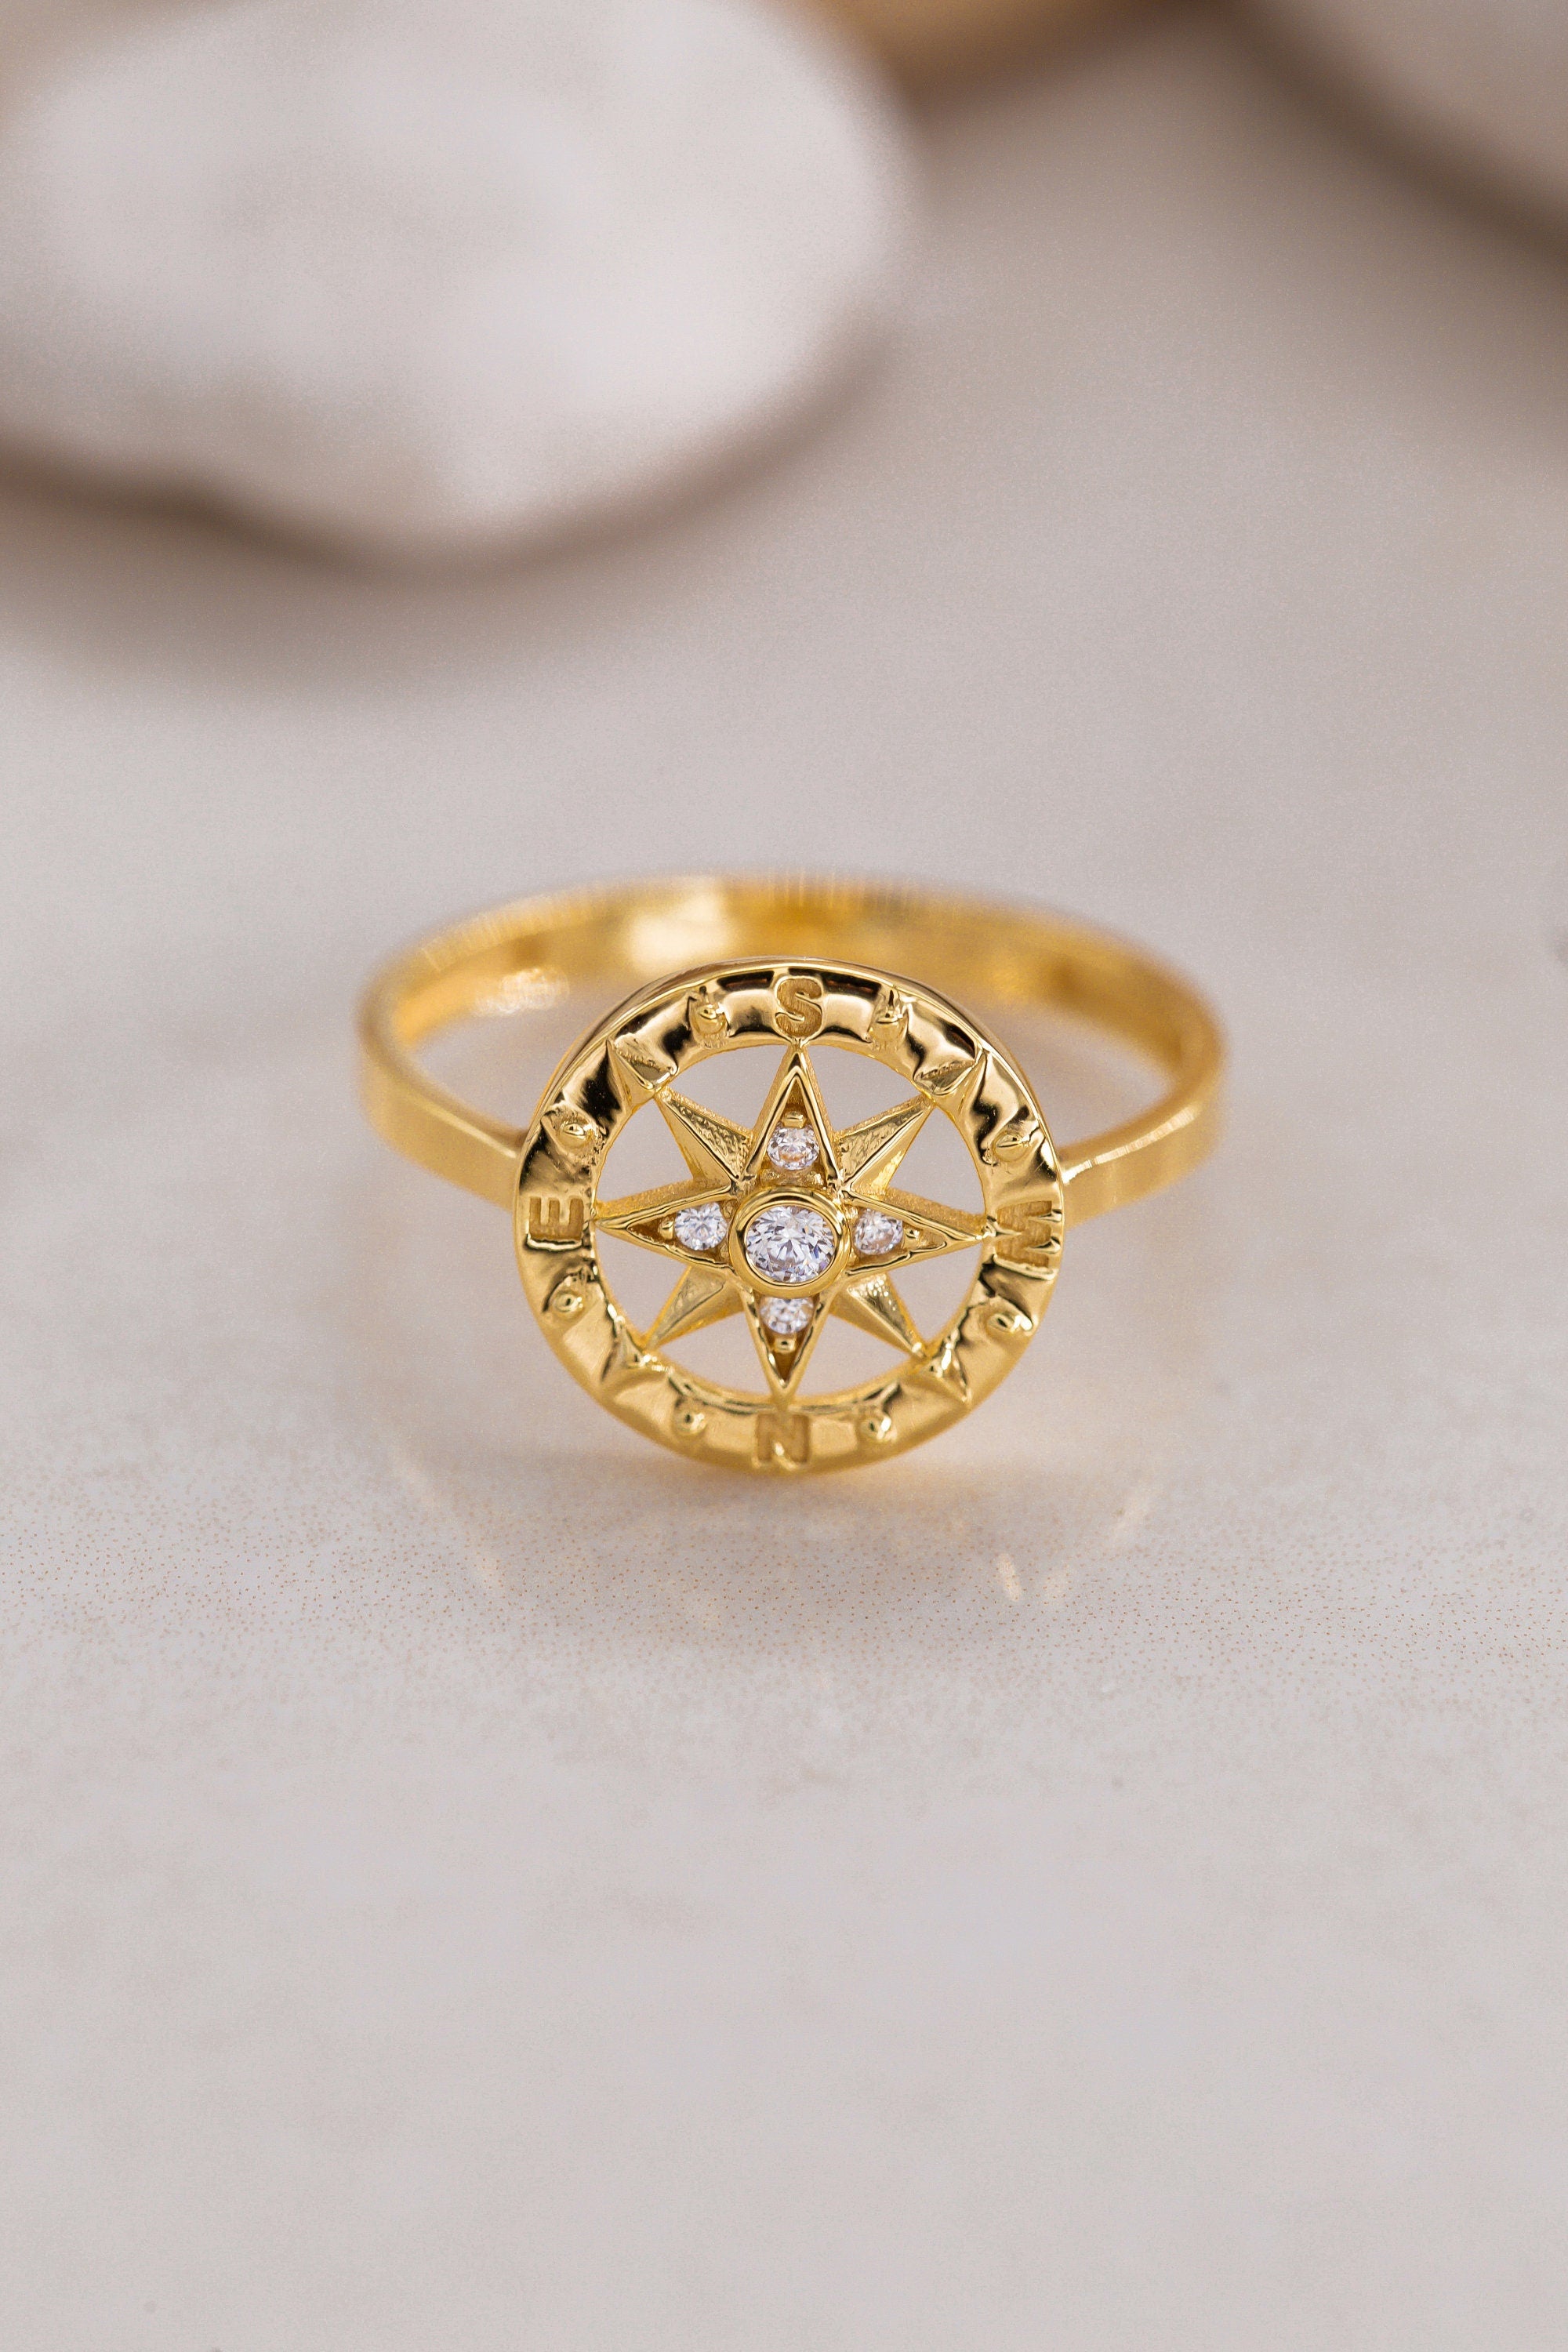 14K Gold Celestial Motif, 925 Sterling Silver Ring, Minimalist Starburst Design, Astronomy-Inspired Band, Cosmic Starry Jewelry Piece